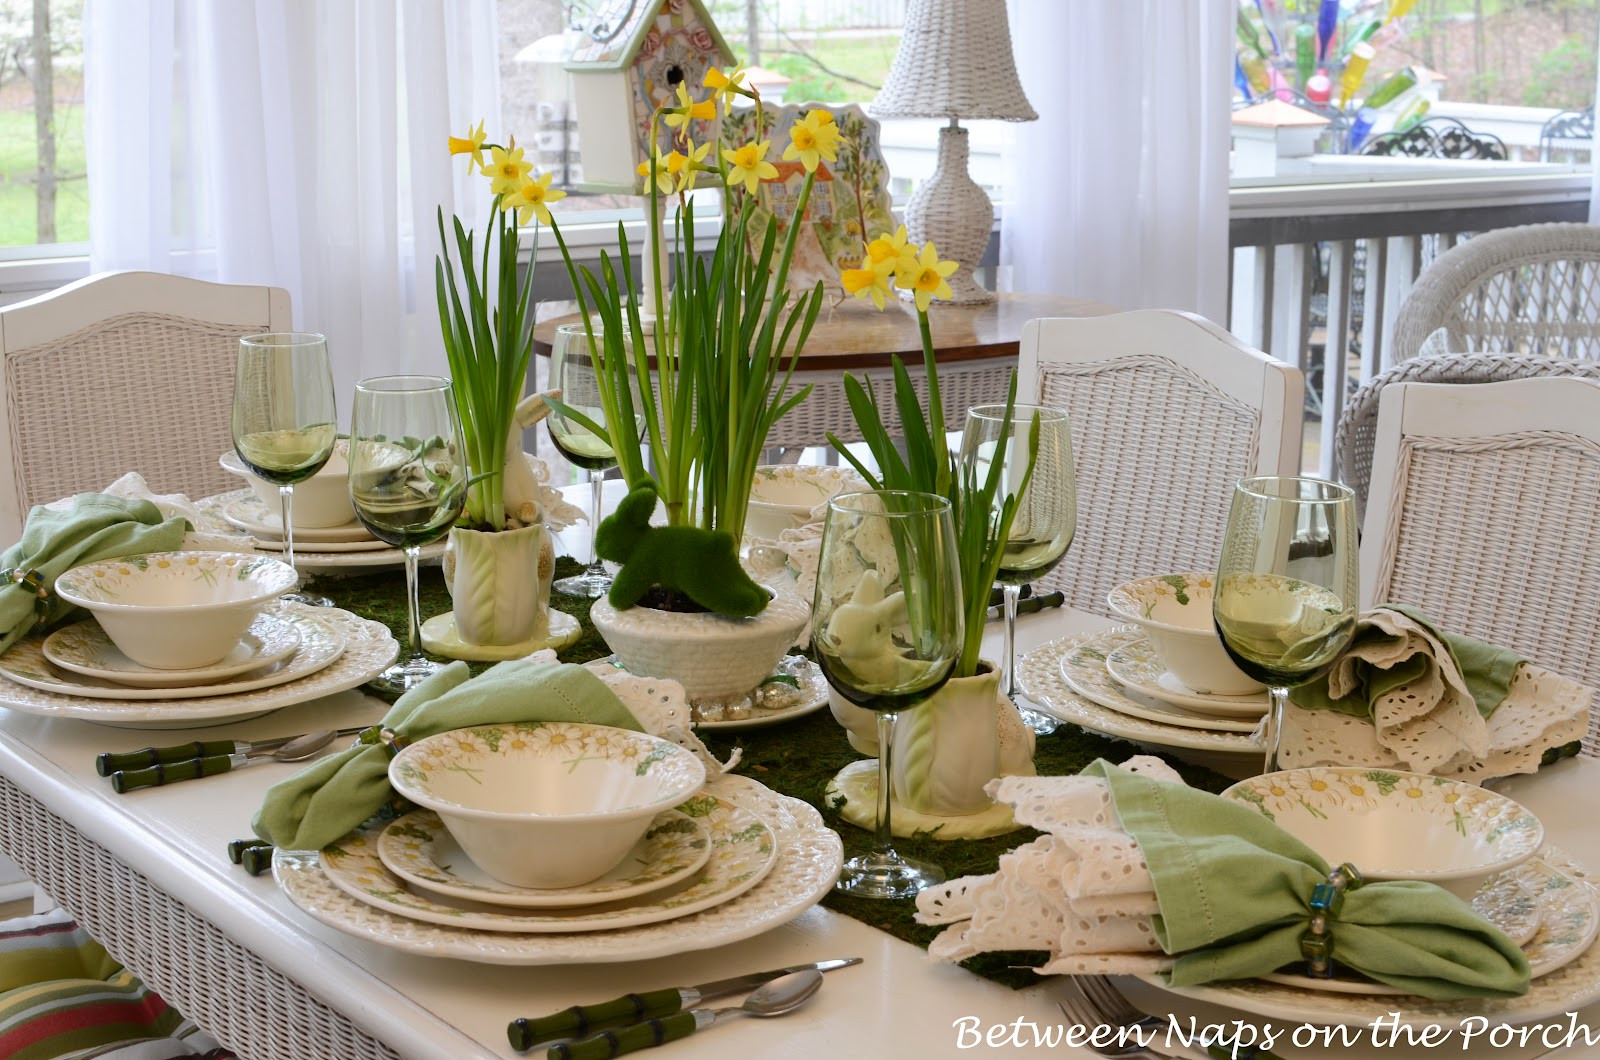 Easter Dinner Table Settings
 Lovely Table Decorating Ideas for The Up ing Easter